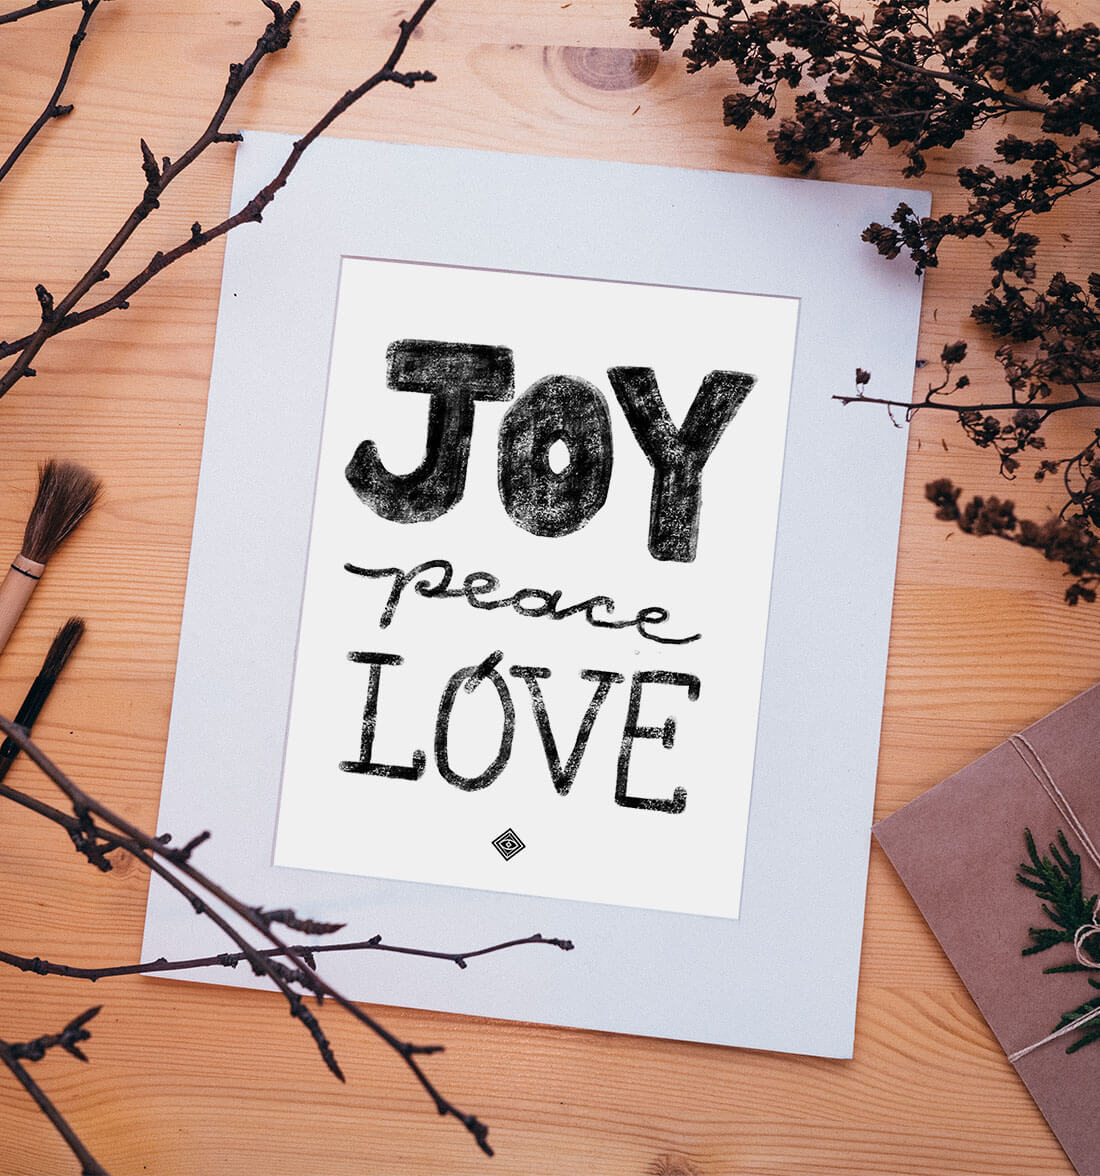 Joy Peace Love Holiday Free Printable • Little Gold Pixel • In which I share a handlettered Joy Peace Love holiday free printable to use as a card or decor this holiday season. Download, print and hang today! #holidayprintable #christmasprintable #joypeacelove #freeprintable #freebies